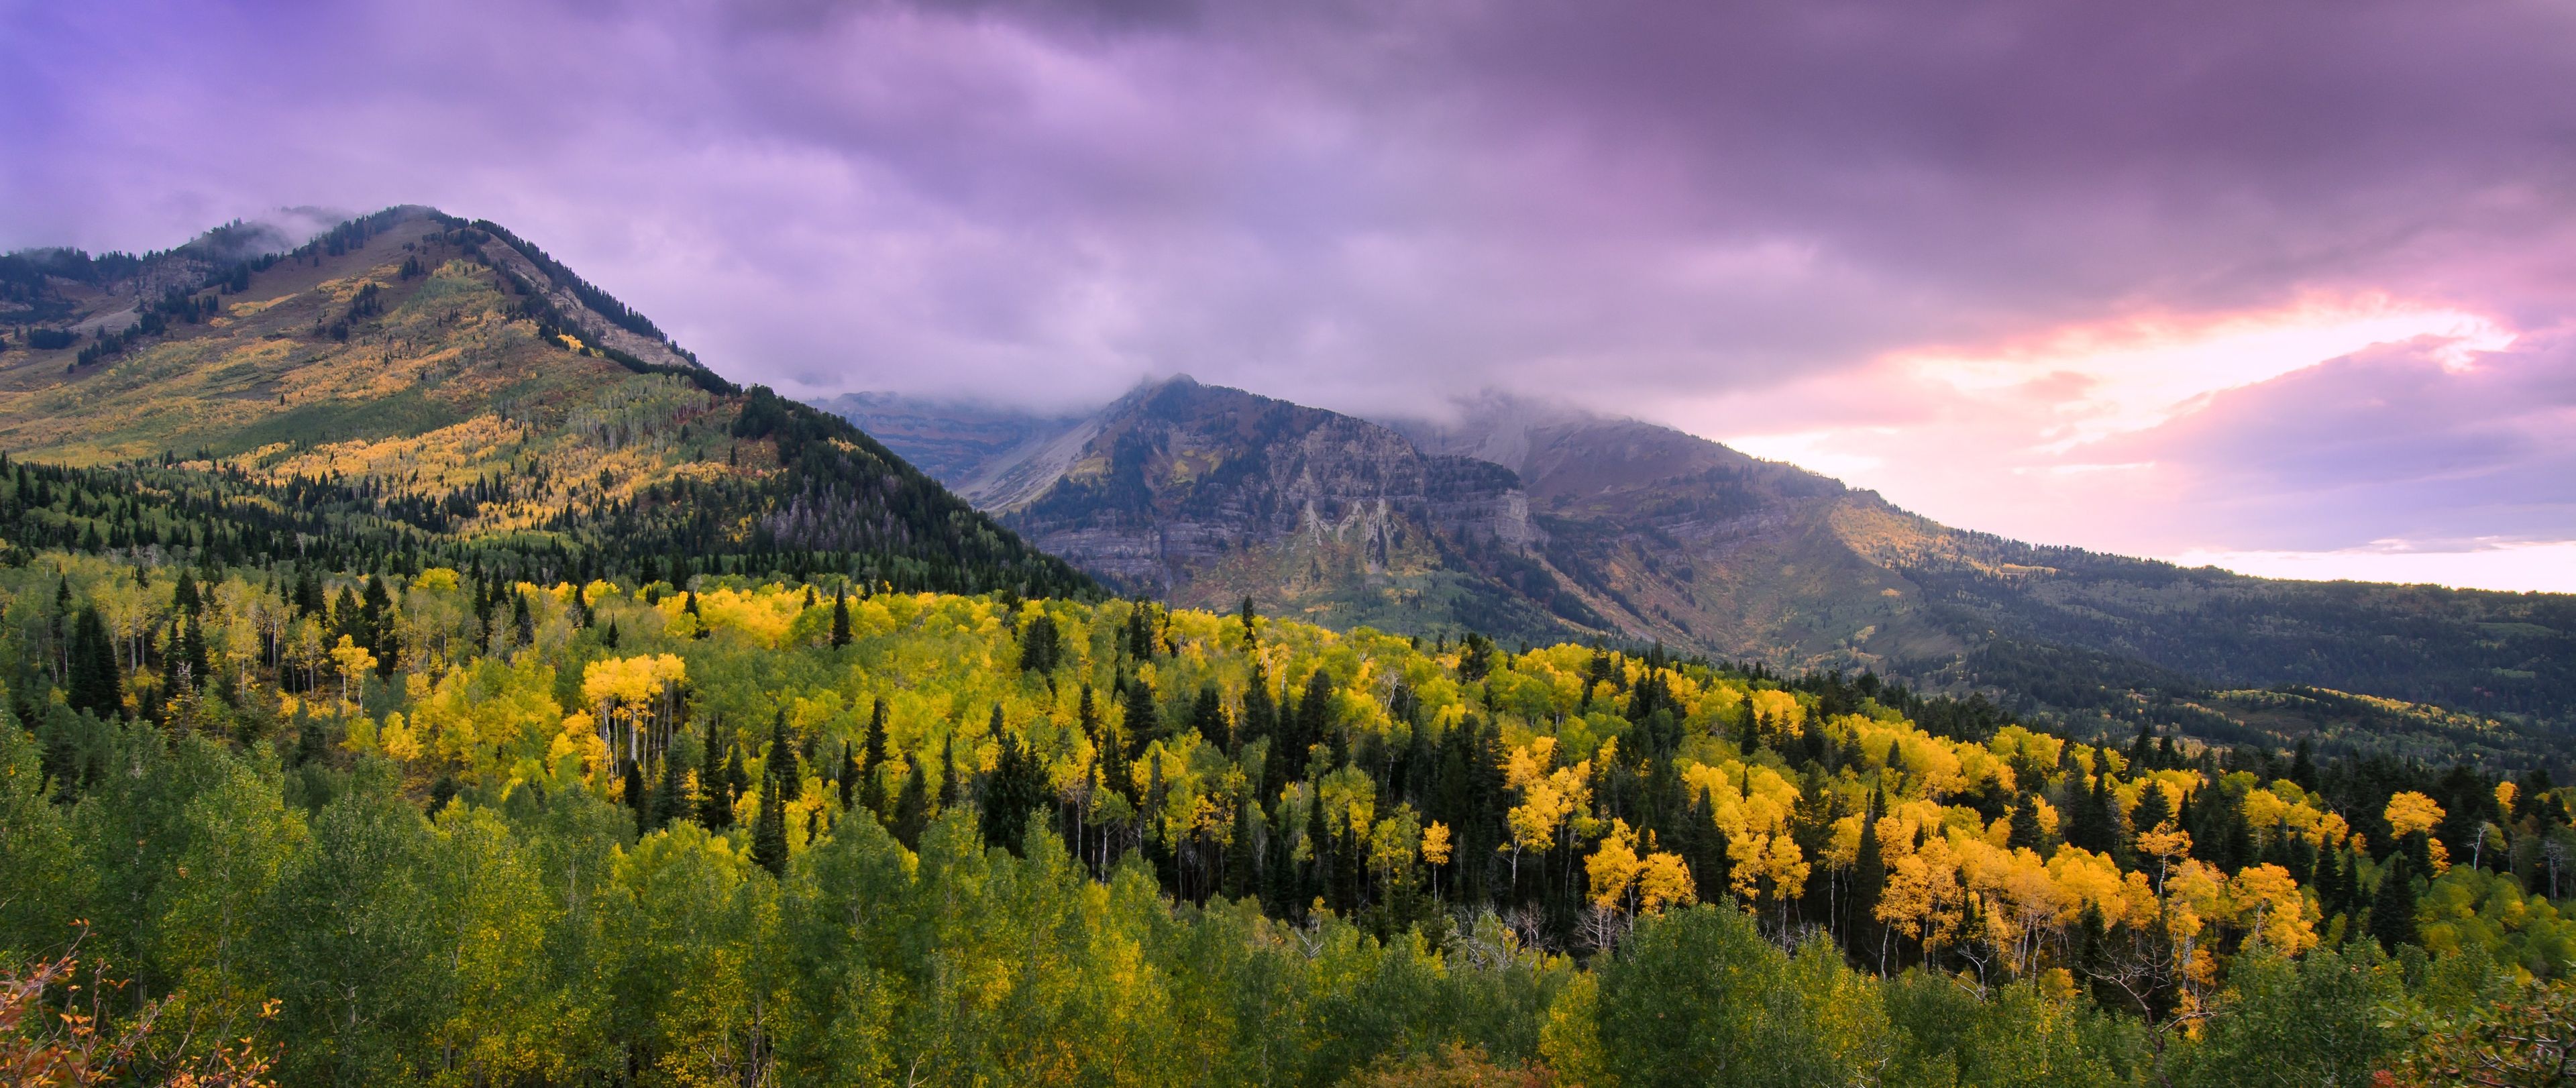 Mountains with yellow trees in the autumn.